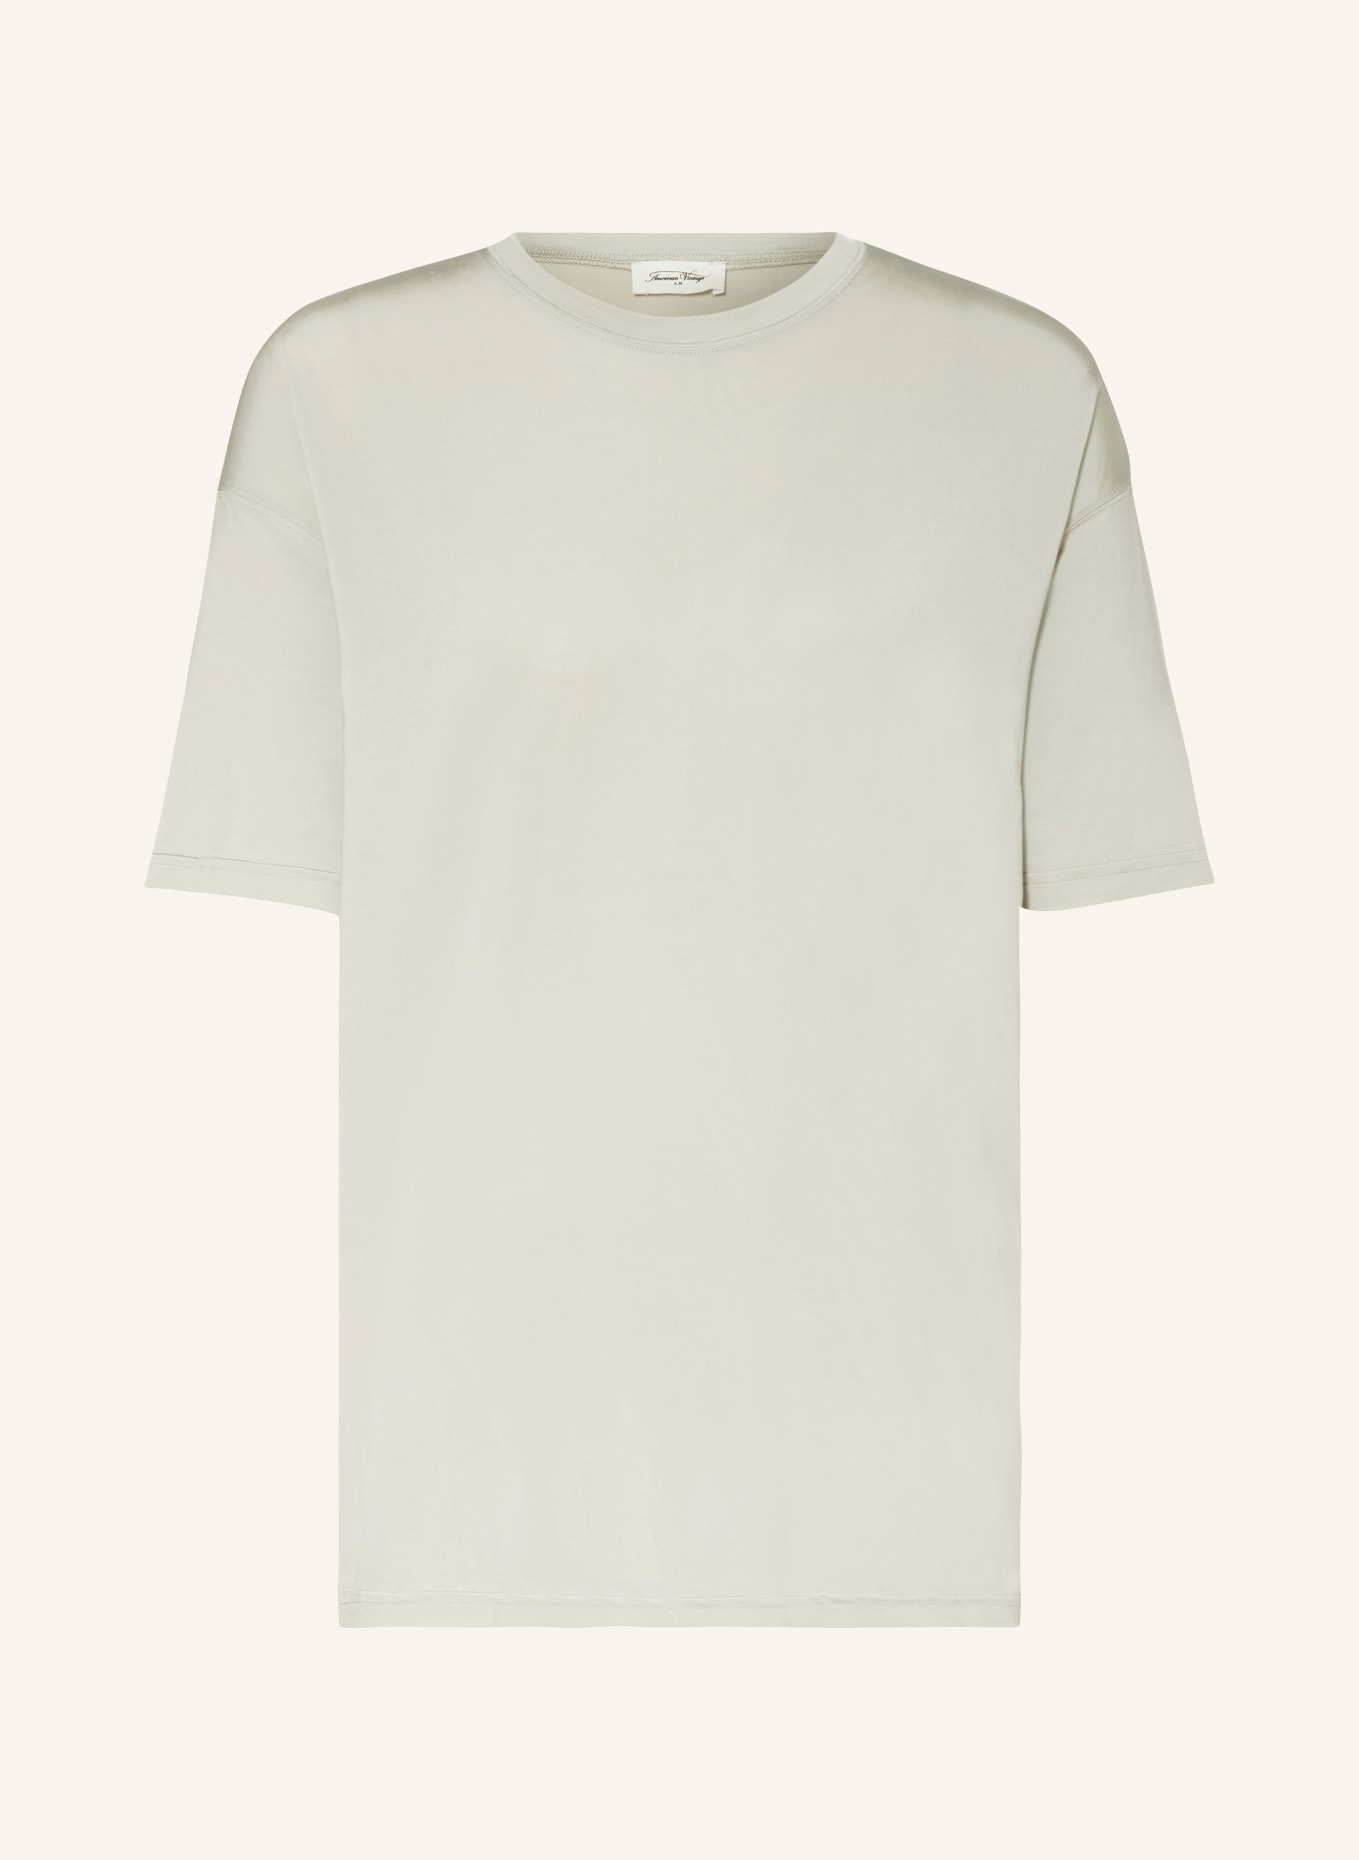 American Vintage T-shirt FUOBOW, Color: LIGHT GRAY (Image 1)